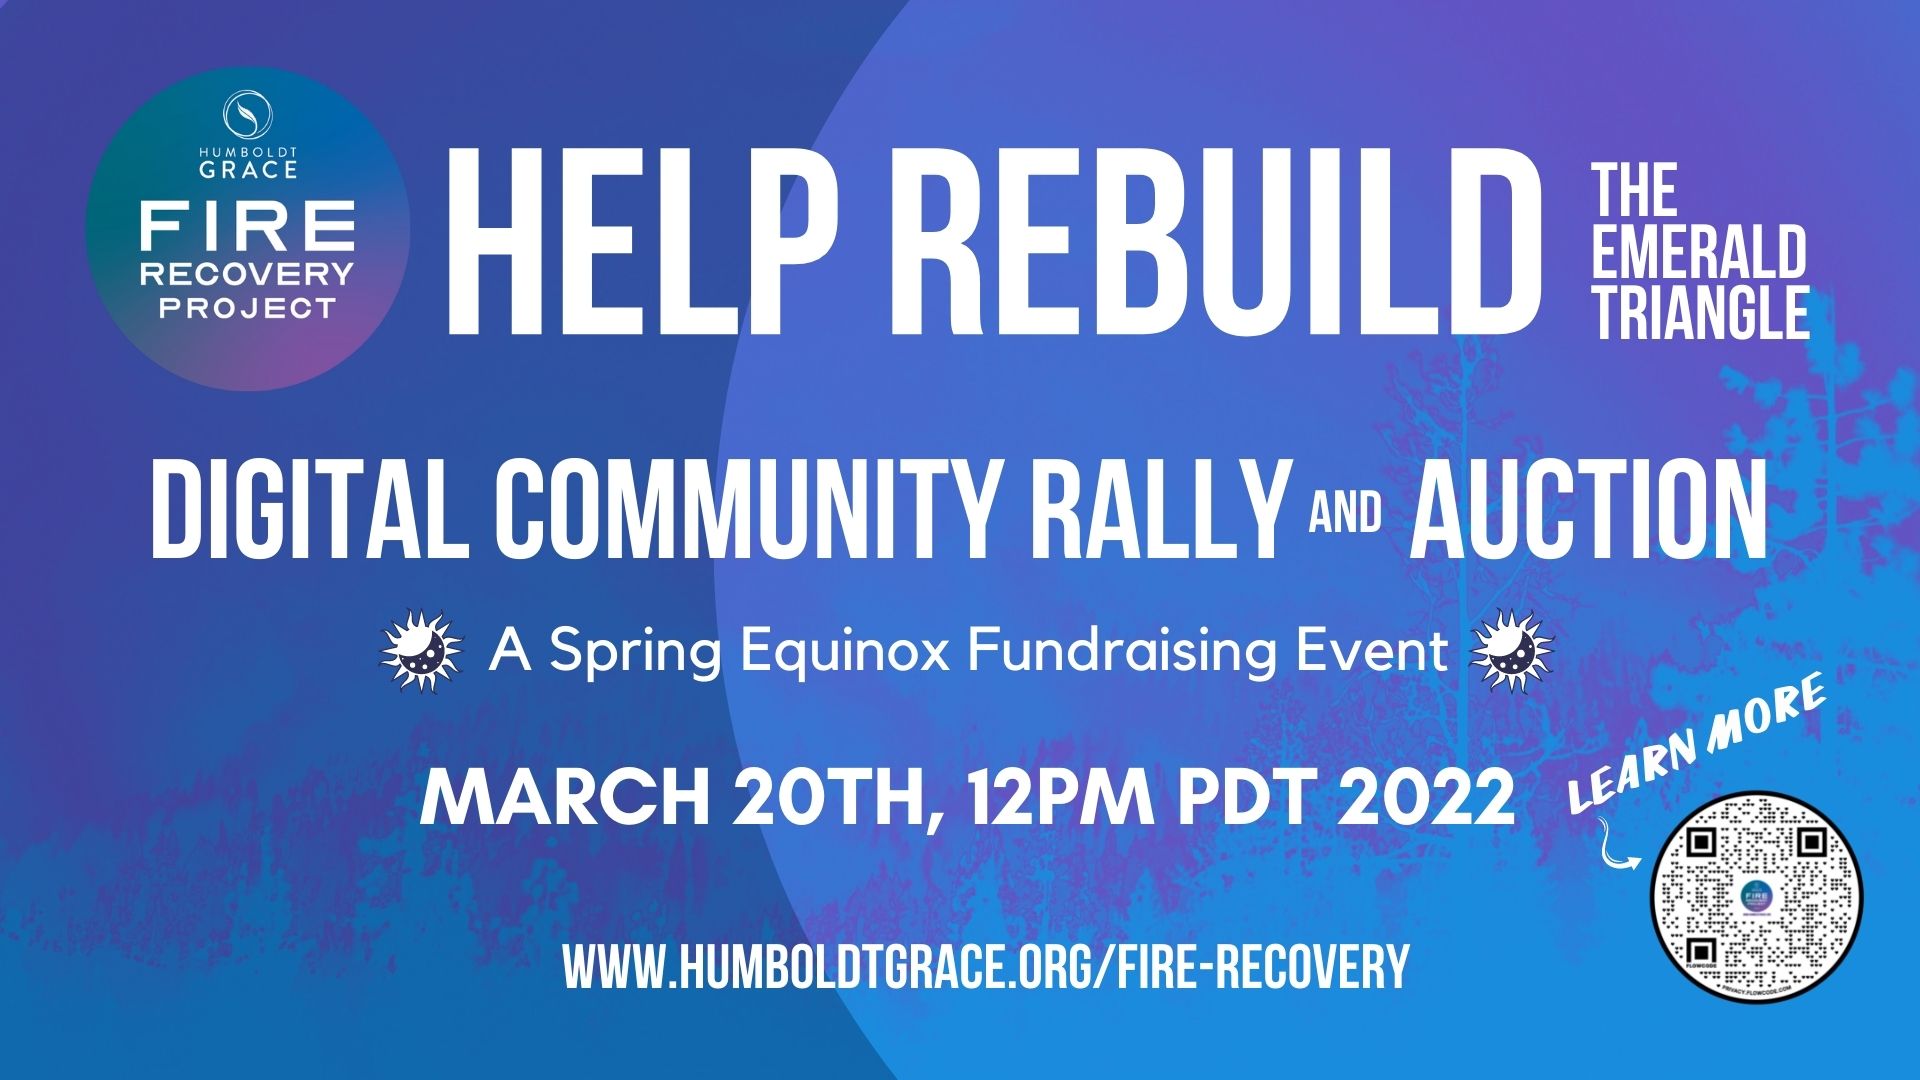 The Humboldt Grace Fire Recovery Project Community Digital Rally and Fundraiser : Help Rebuild The Emerald Triangle